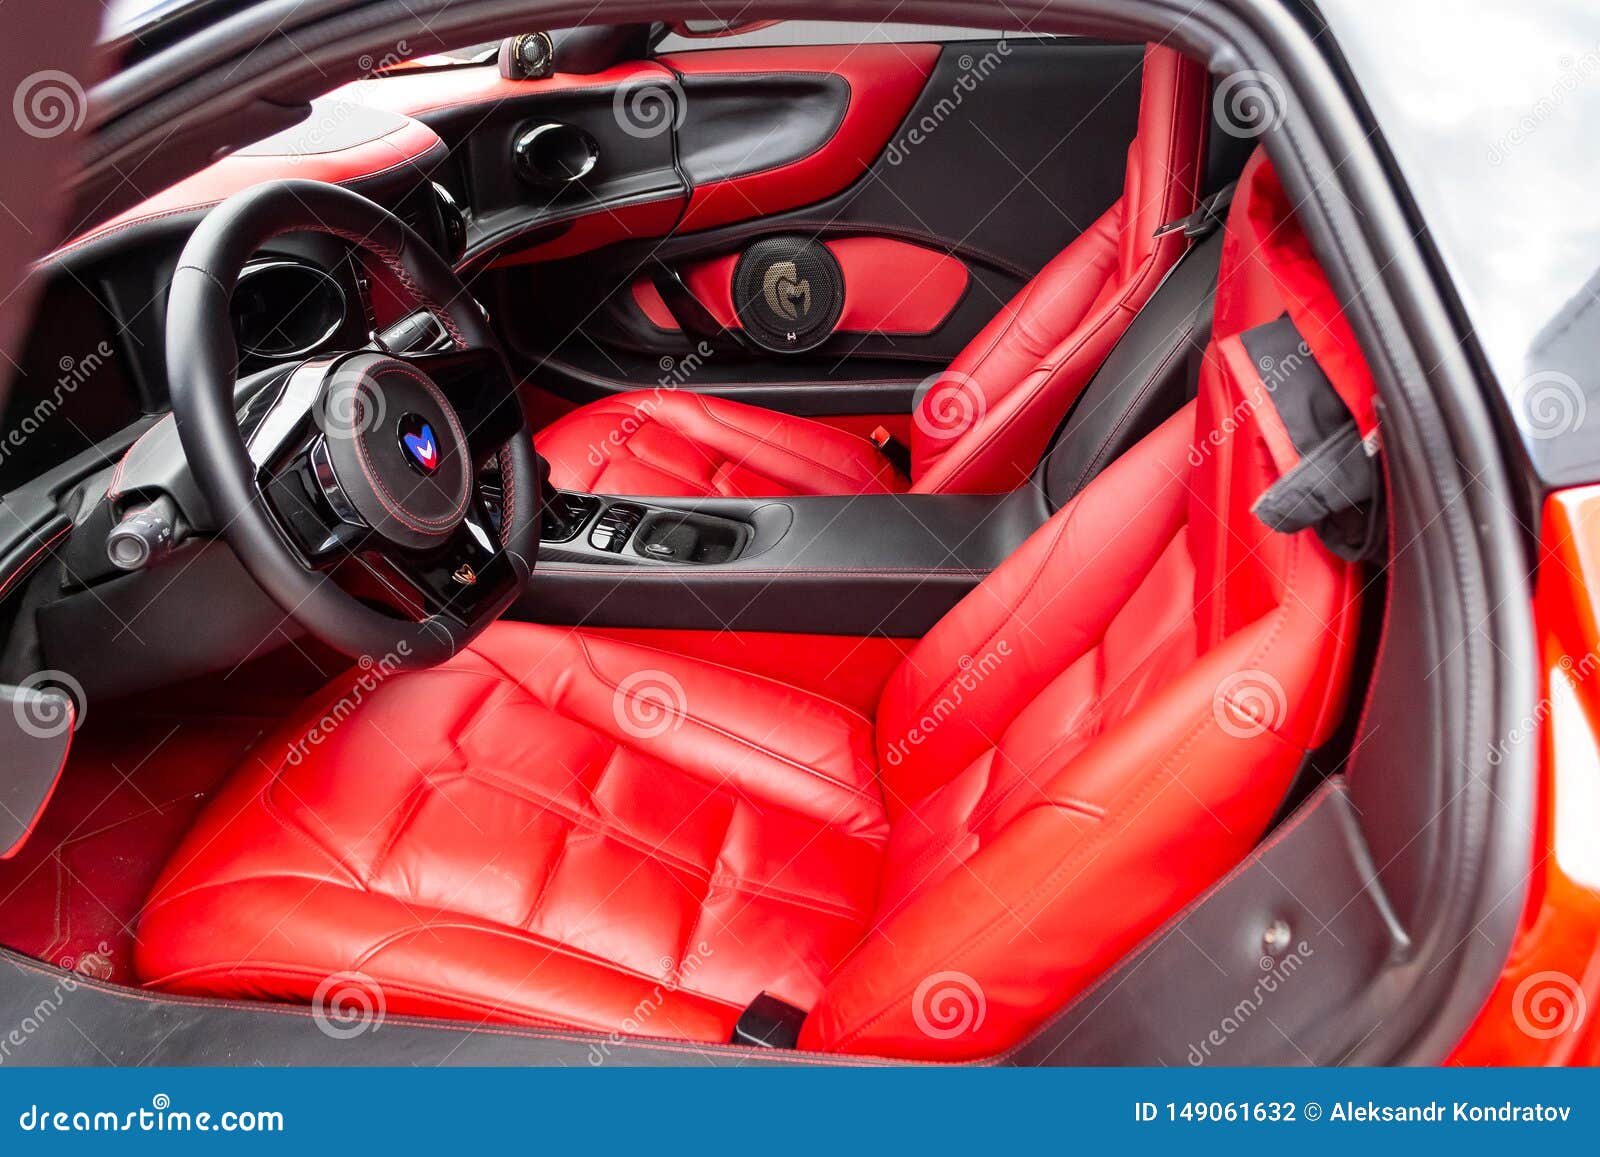 Interior Of A Sports Car Marussia B1 Of Red Color With